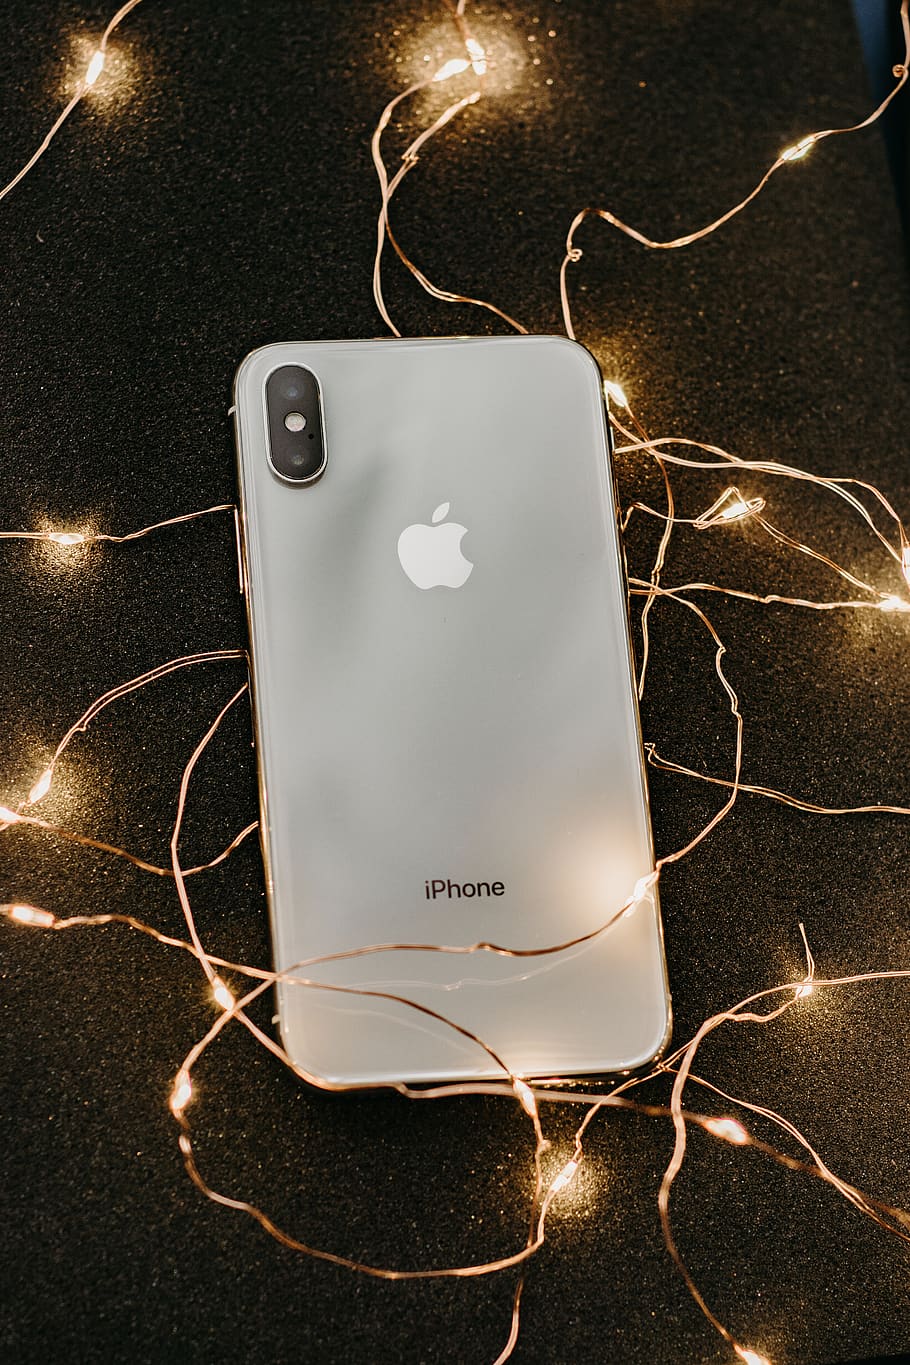 HD wallpaper: Silver Iphone X Lying on Pre-lit String Lights, communication  device | Wallpaper Flare